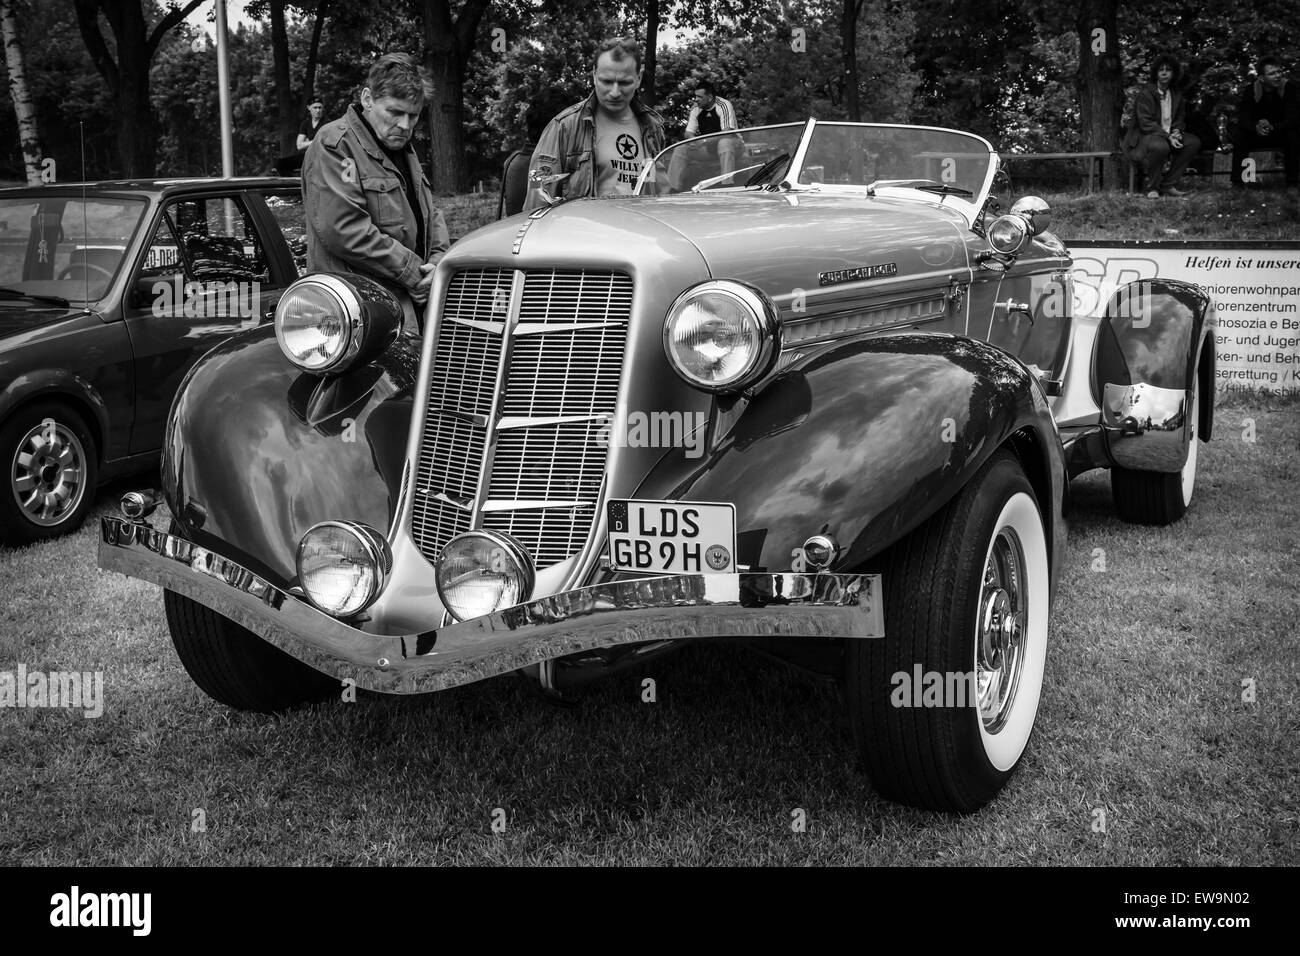 PAAREN IM GLIEN, GERMANY - MAY 23, 2015: Vintage car Auburn 852 Speedster. Black and white. The oldtimer show in MAFZ. Stock Photo